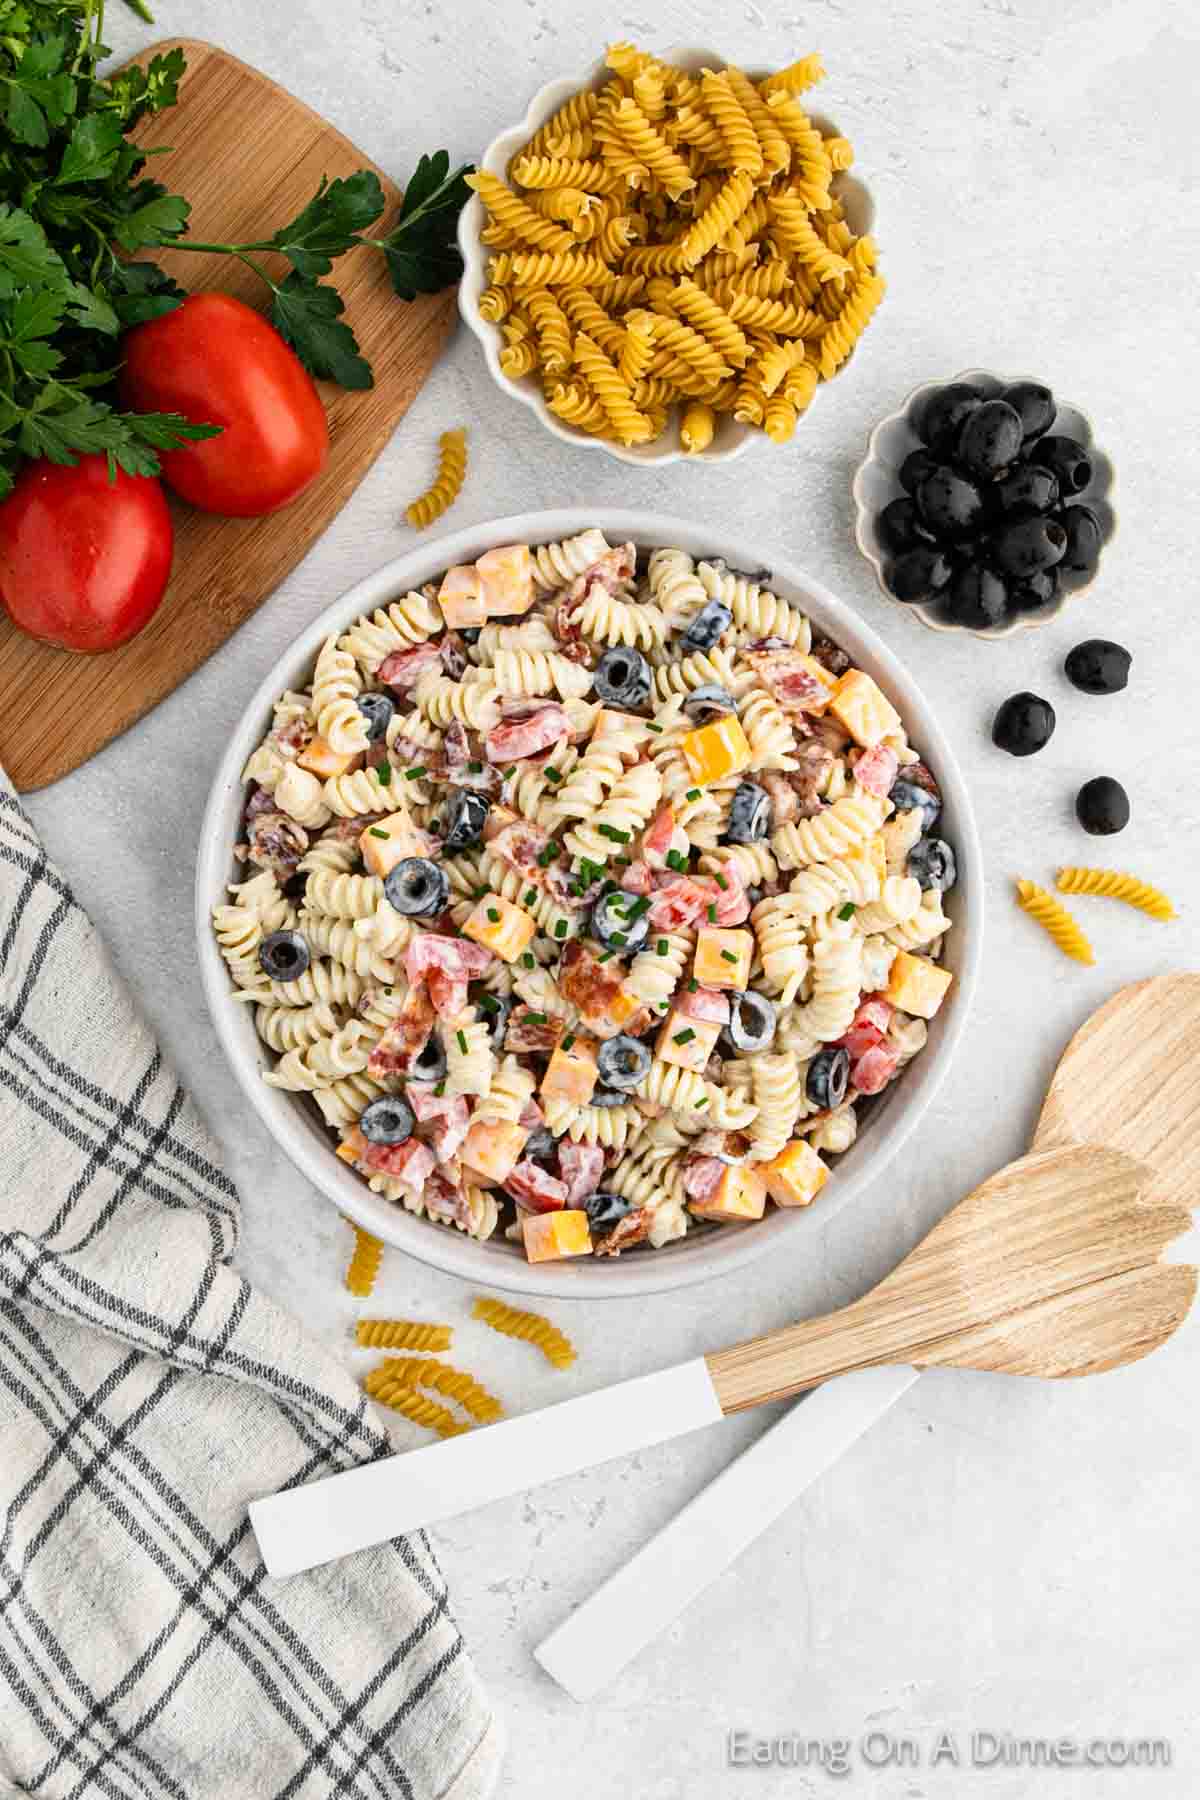 Bacon ranch pasta salad in a bowl with a bowl of black olives, pasta and tomatoes on the side